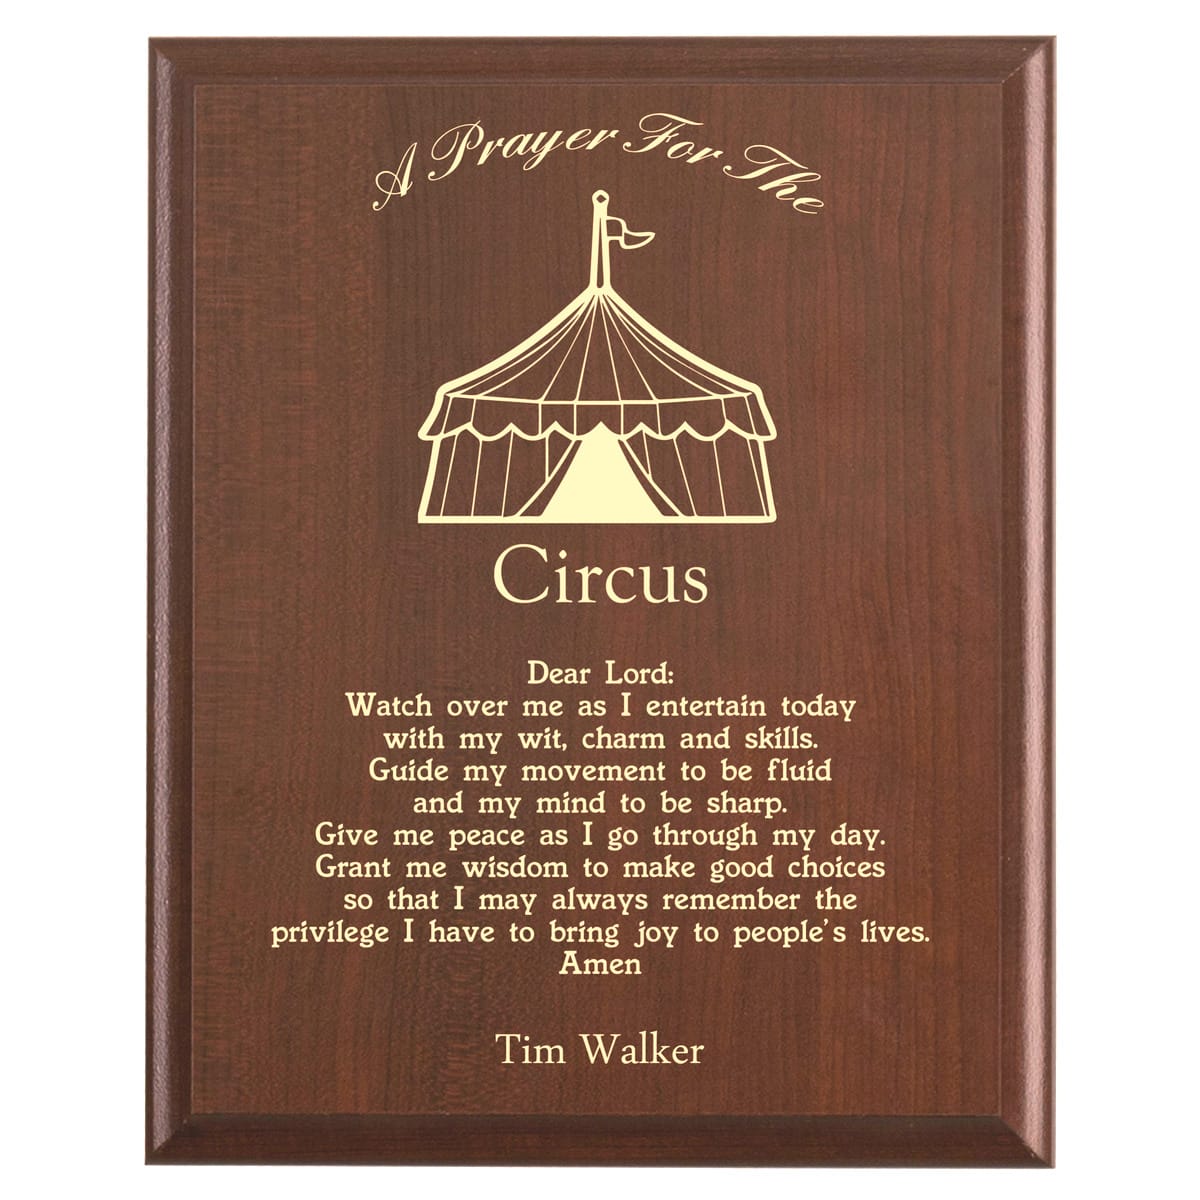 Plaque photo: Circus Prayer Plaque design with free personalization. Wood style finish with customized text.